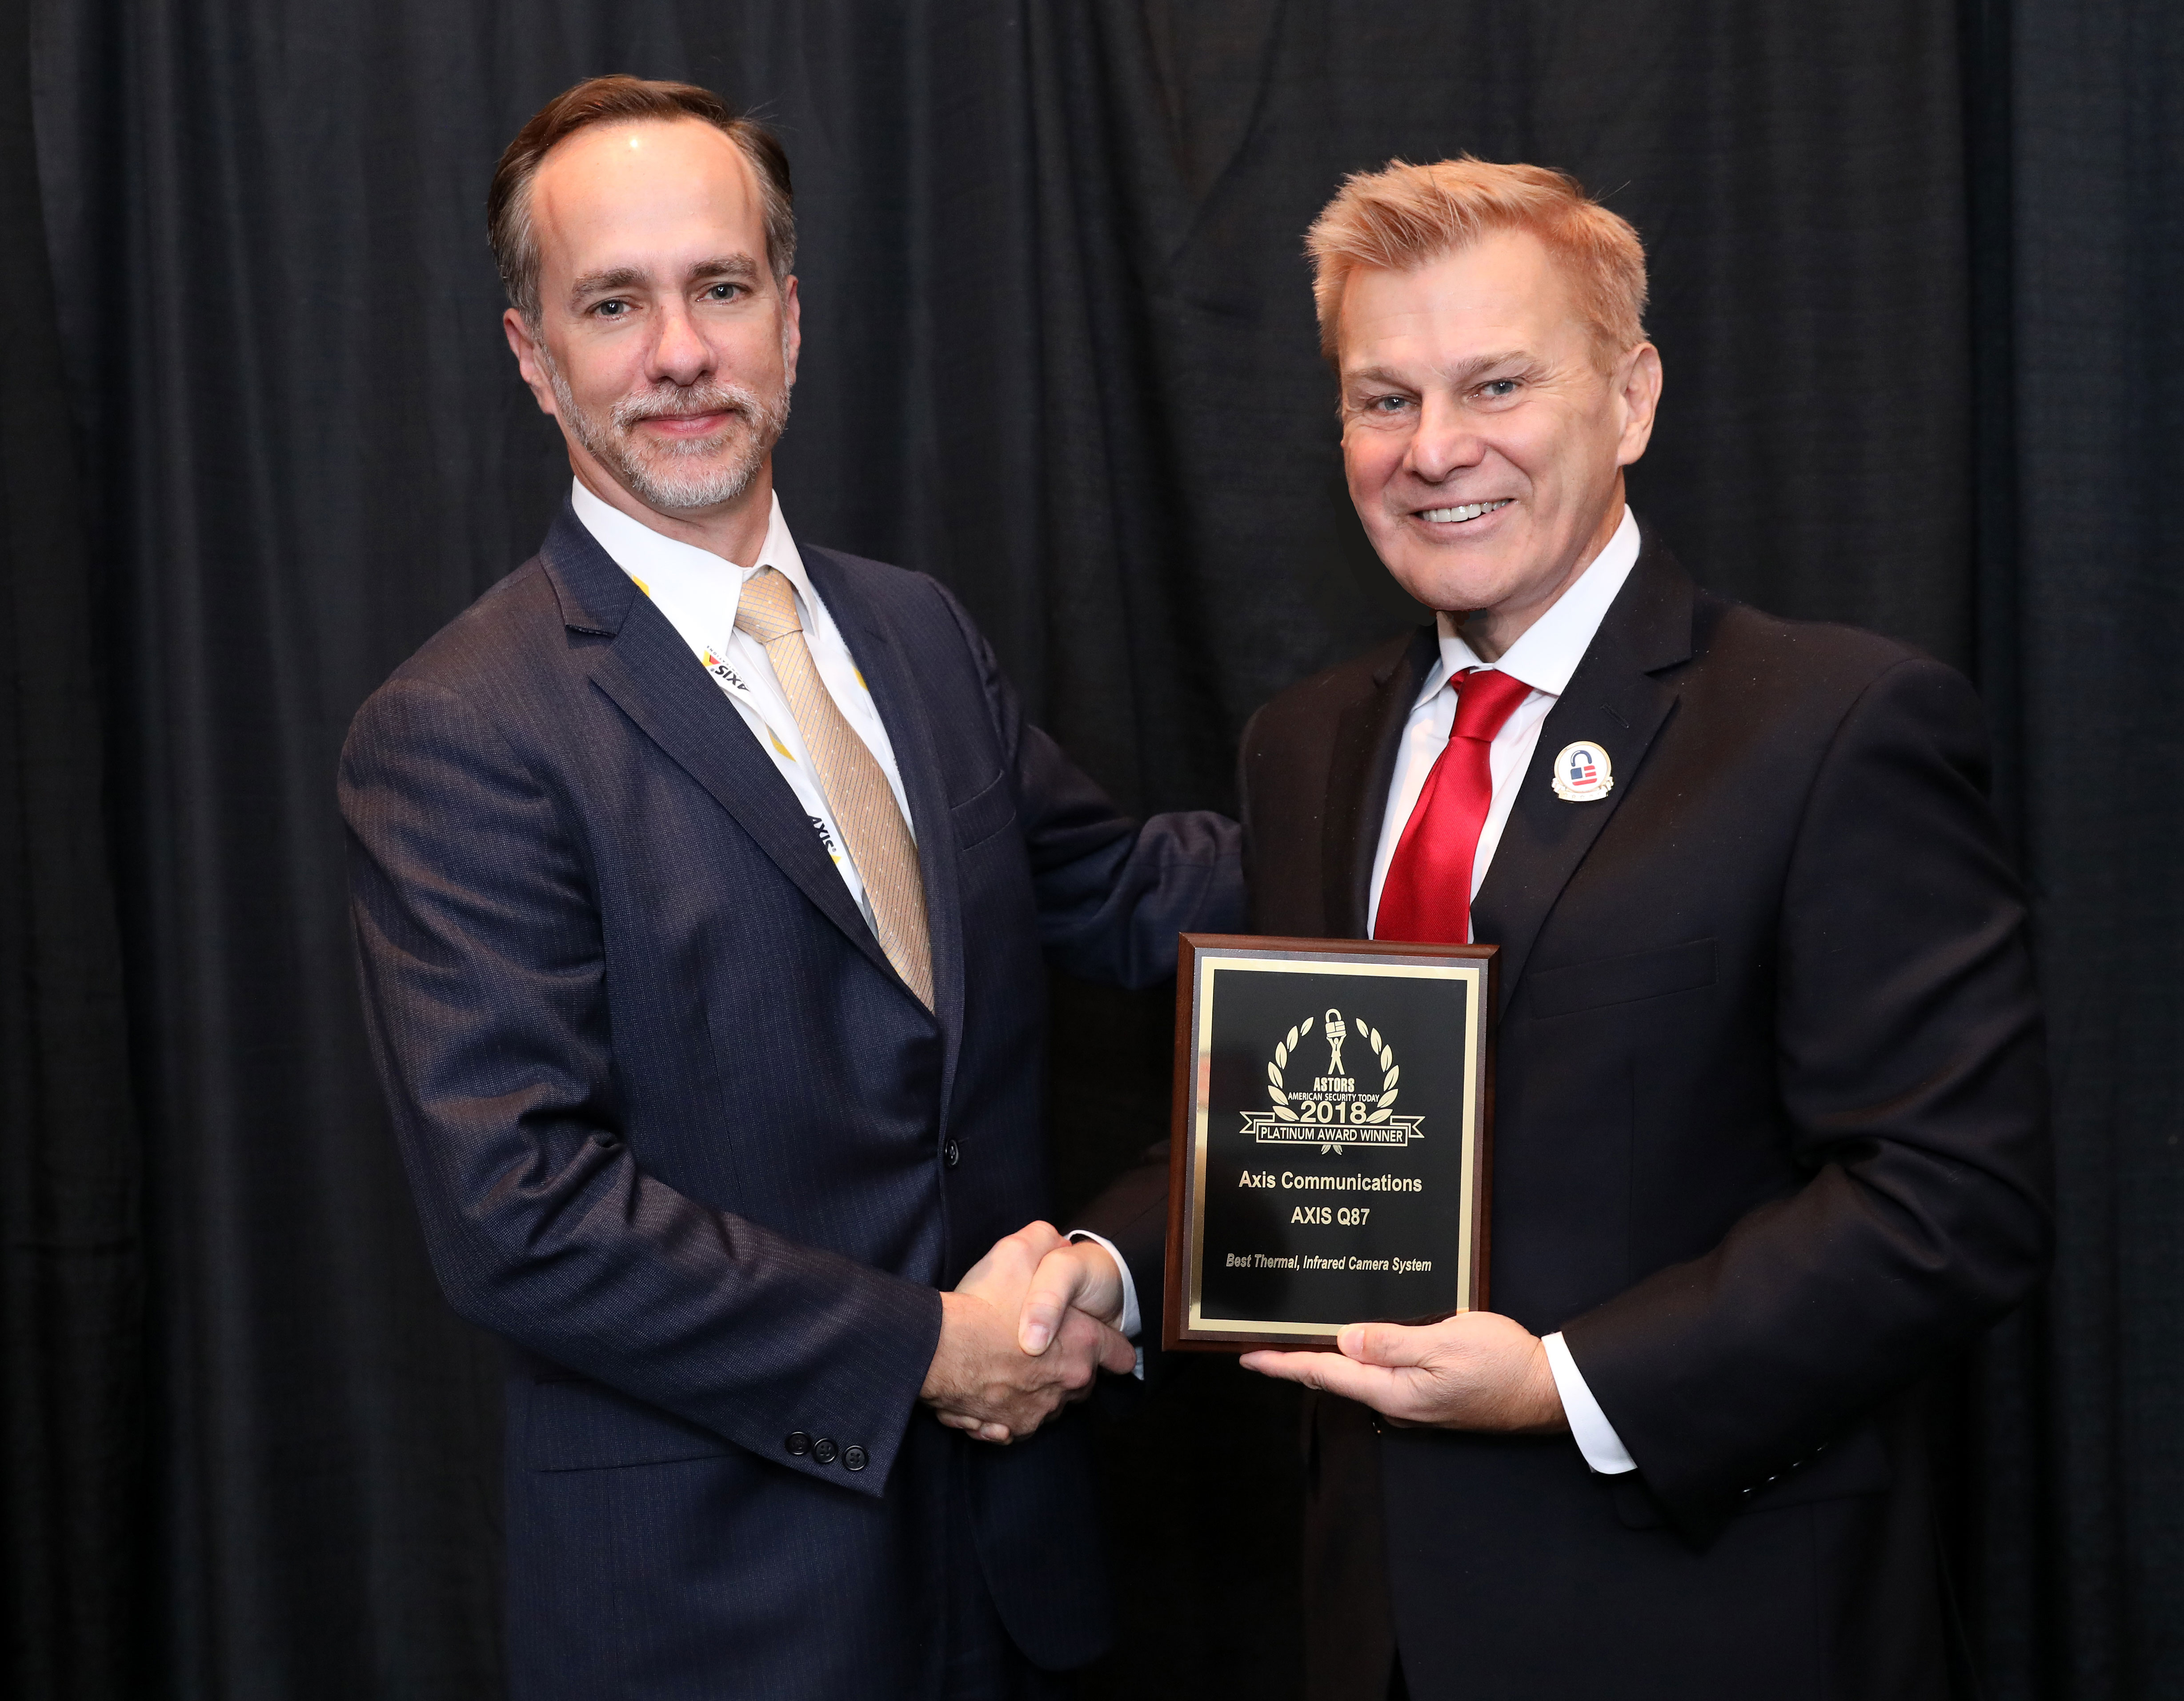 James Marcella, Director of Industry Associations, Axis Communications, accepting a 2018 ‘ASTORS’ Award at ISC East